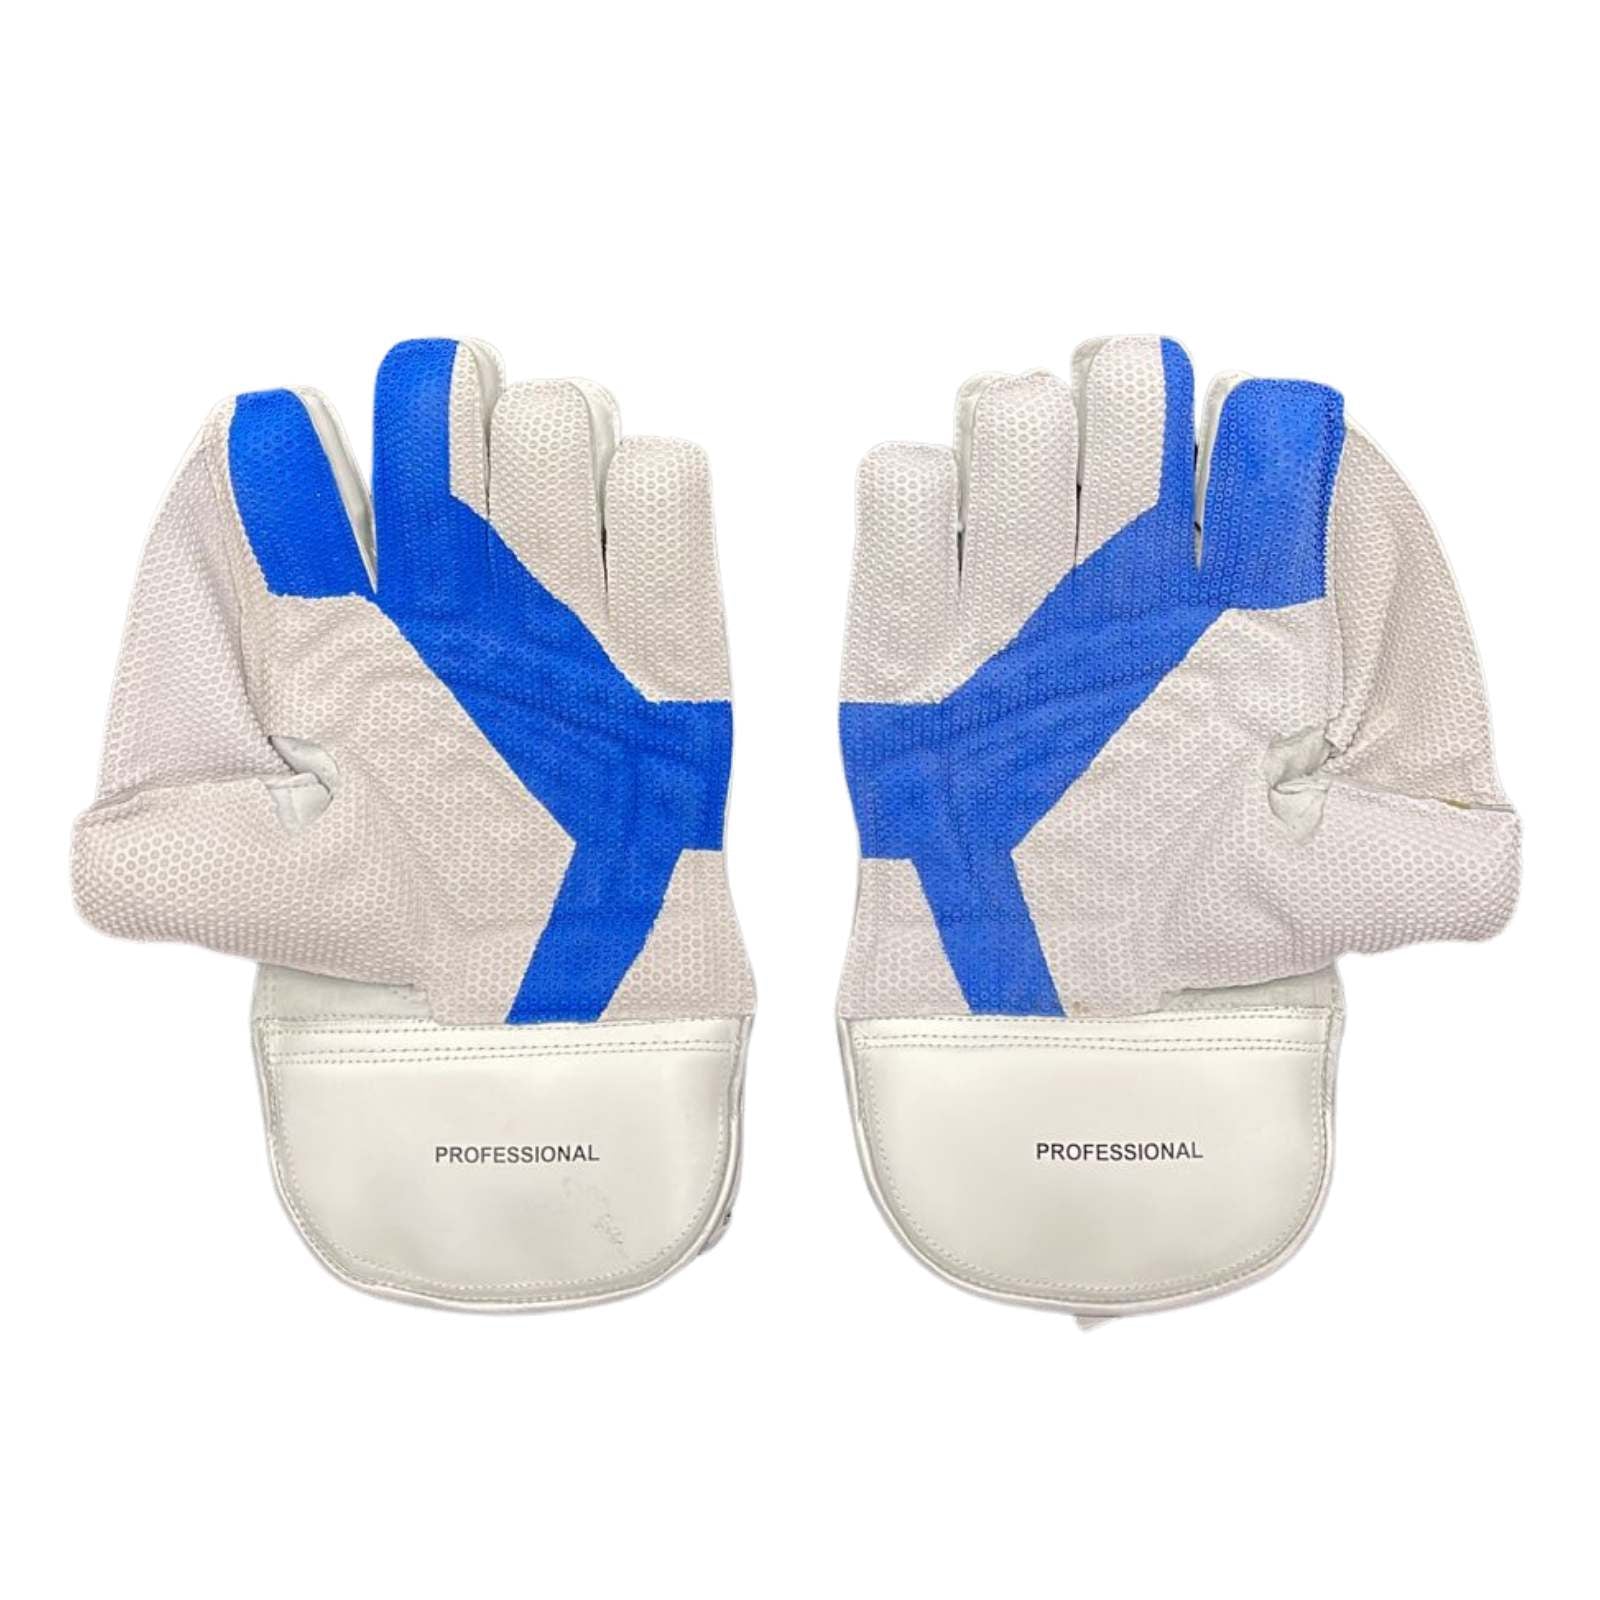 SS Professional Wicket Keeping Gloves - Junior